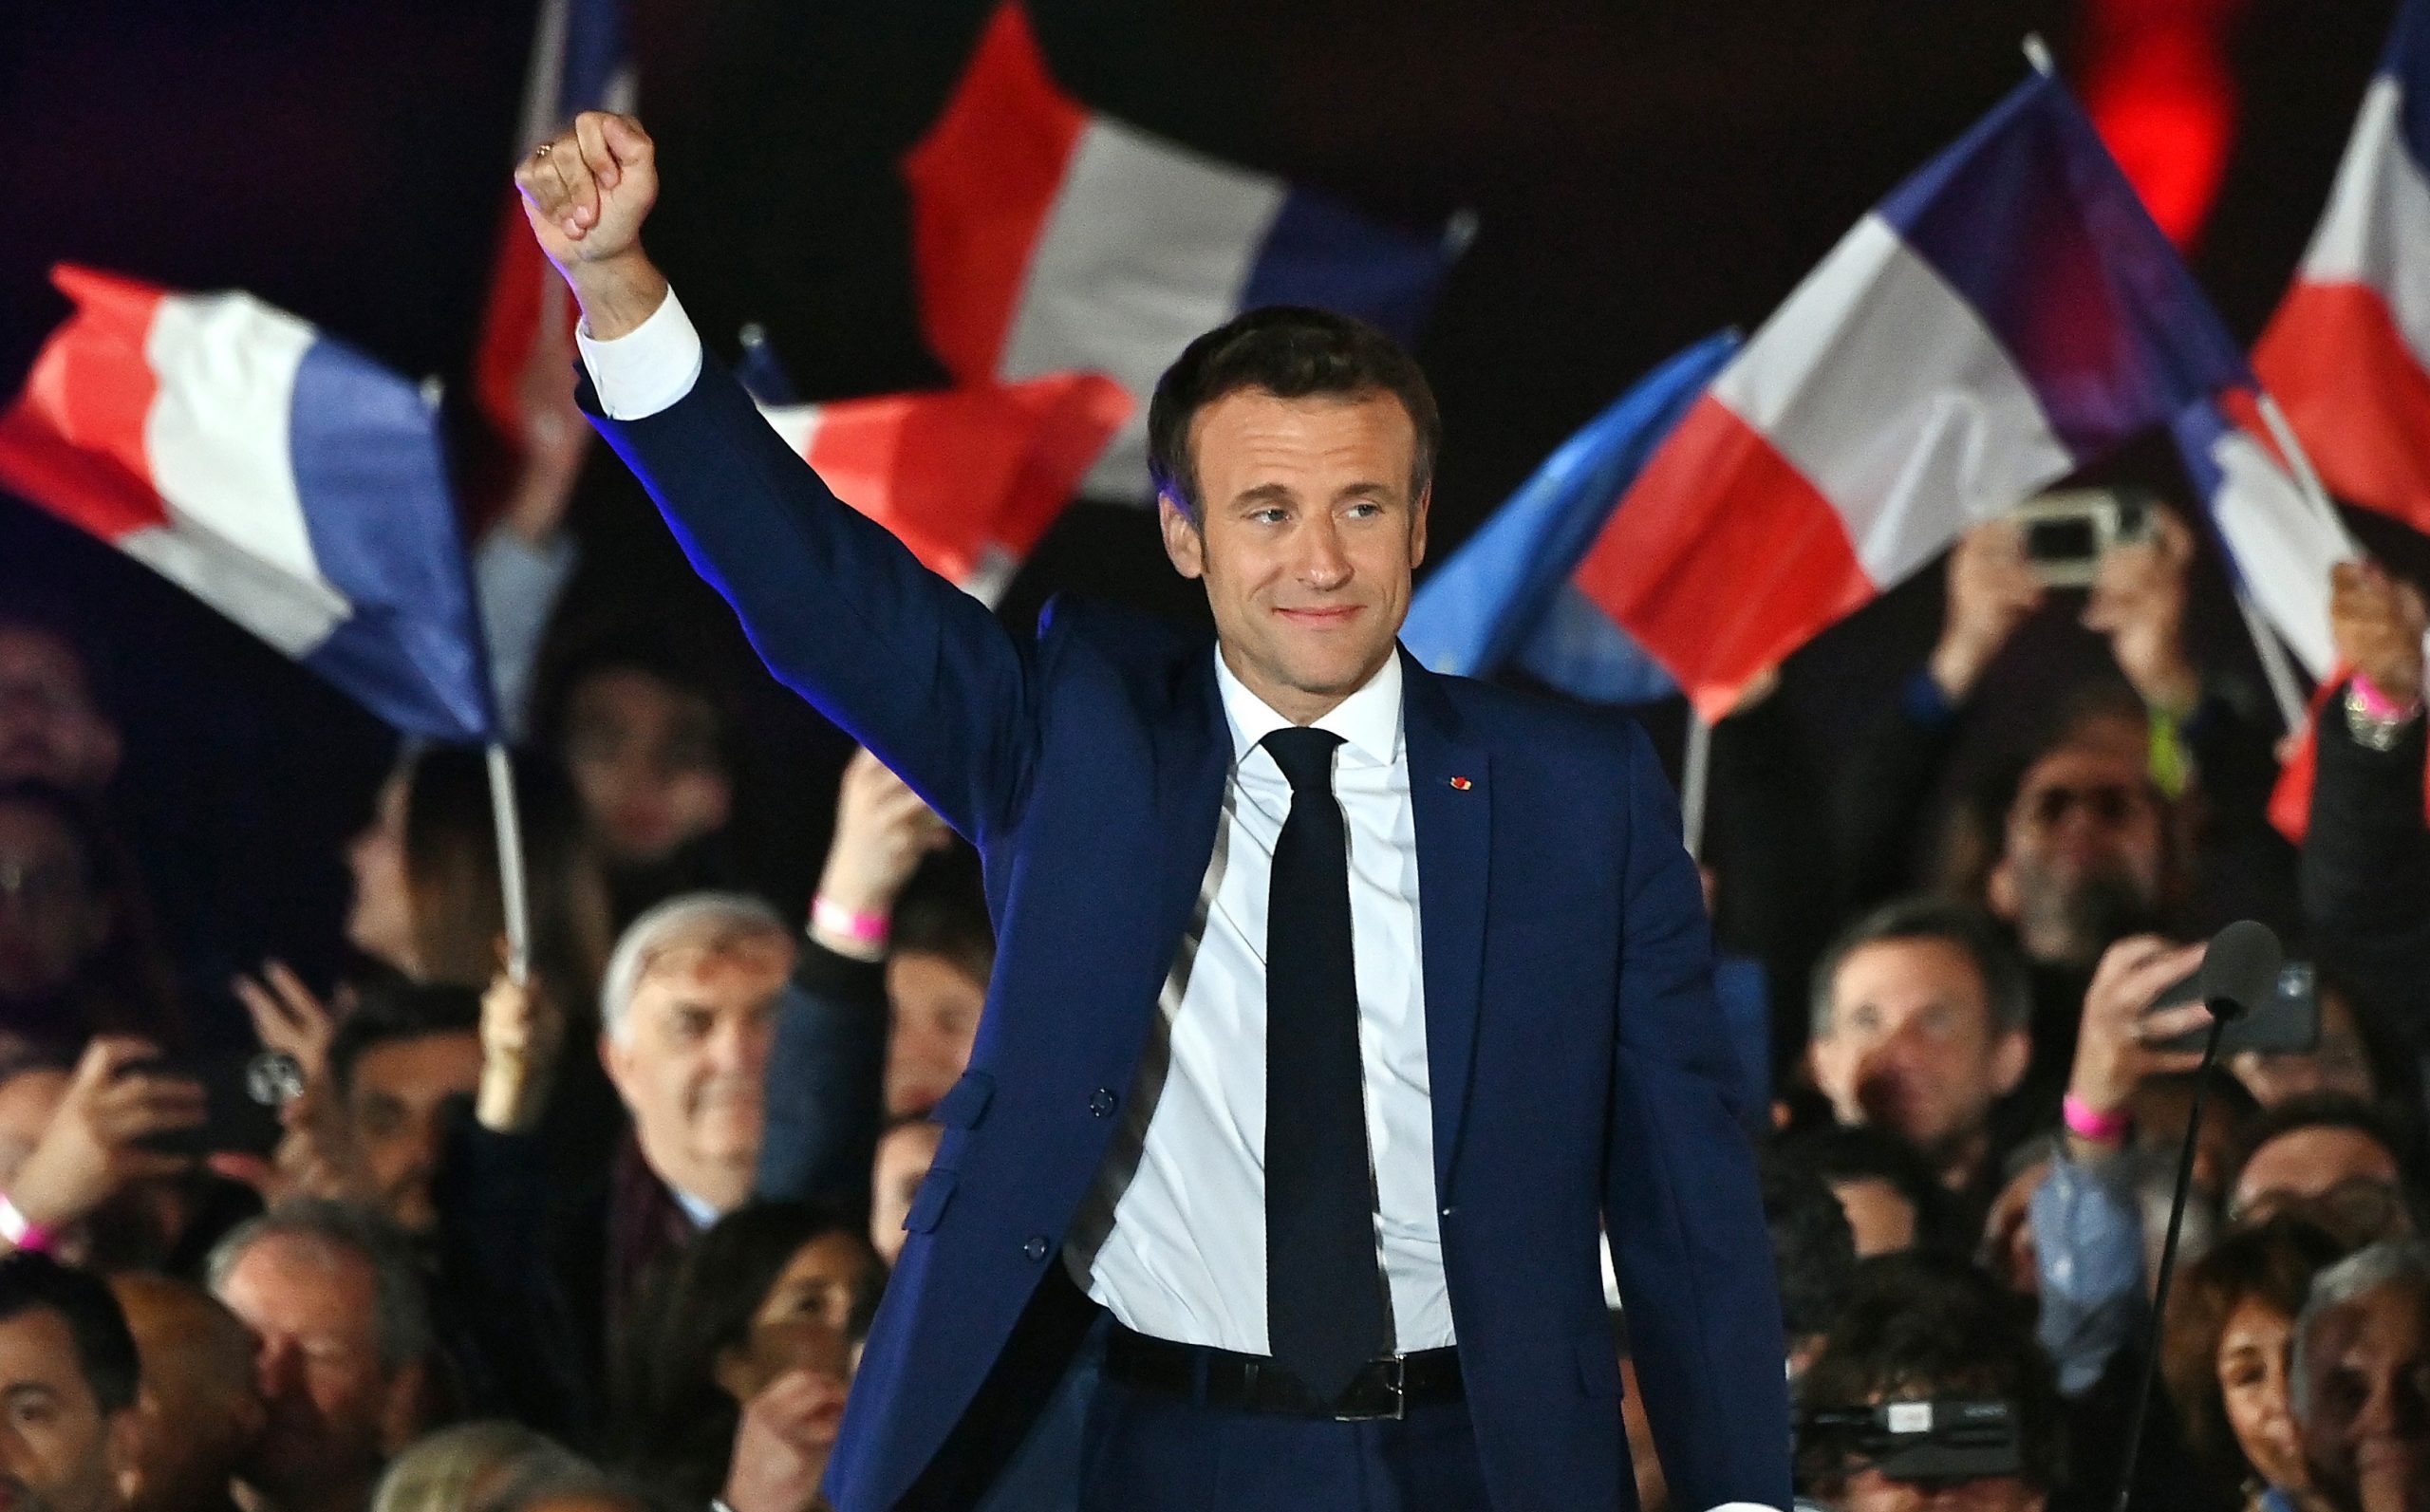 French President Emmanuel Macron raises his fist in front of a crowd of supporters waving French flags.